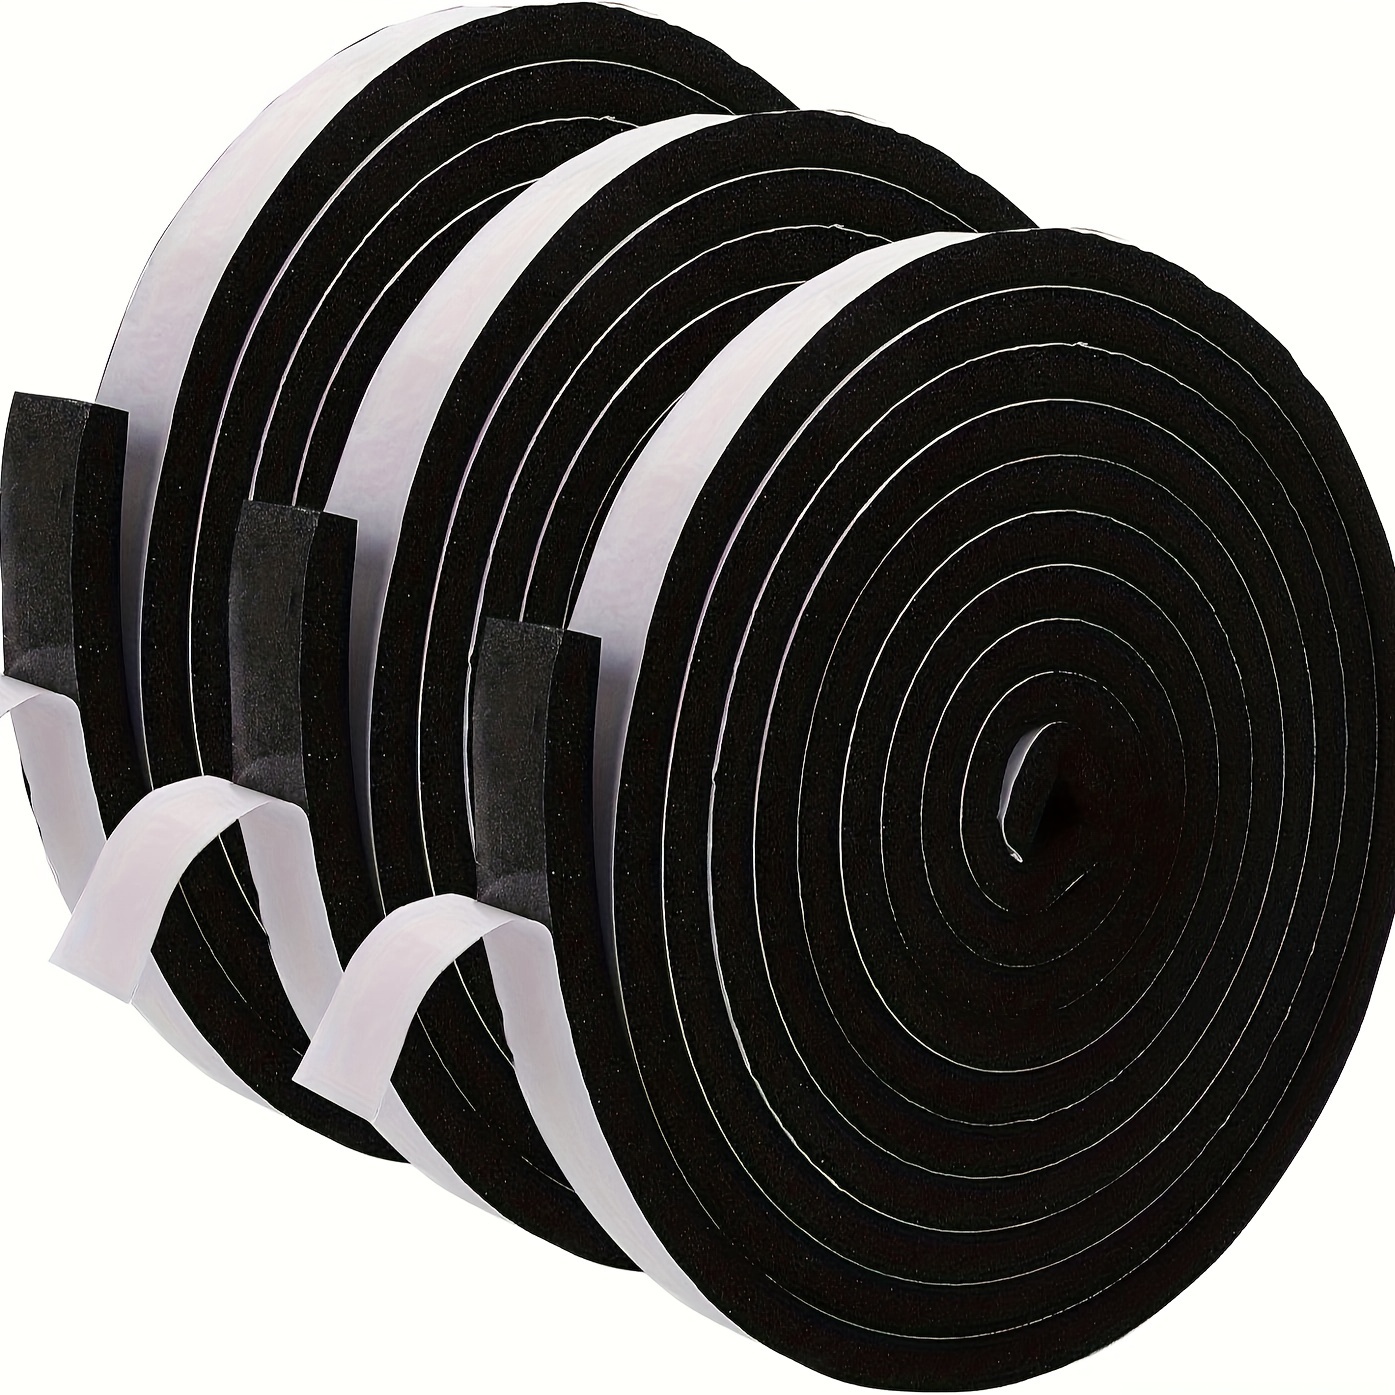 

50 Ft High Density Foam Weather Stripping Door Seal Strip Insulation Tape Roll For Insulating Door Frame, Window, Air Conditioner |